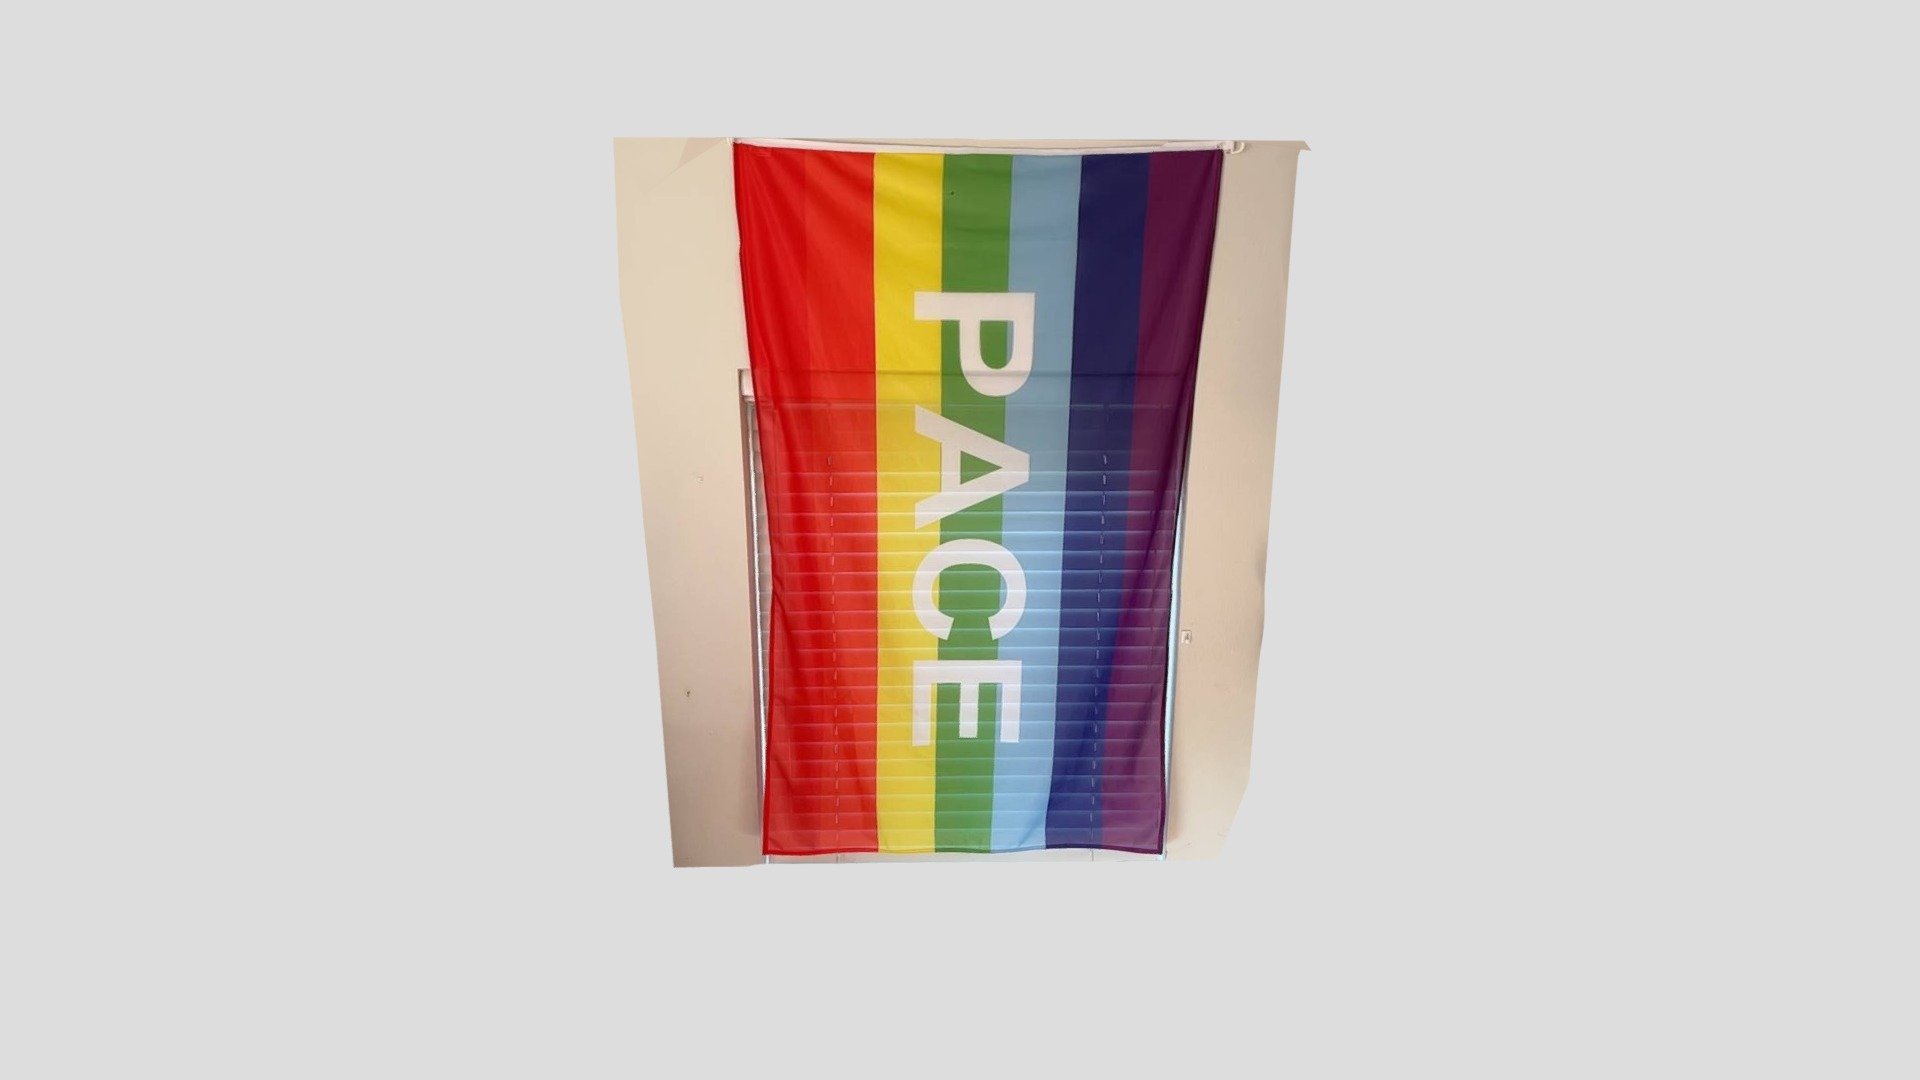 Pace Flag